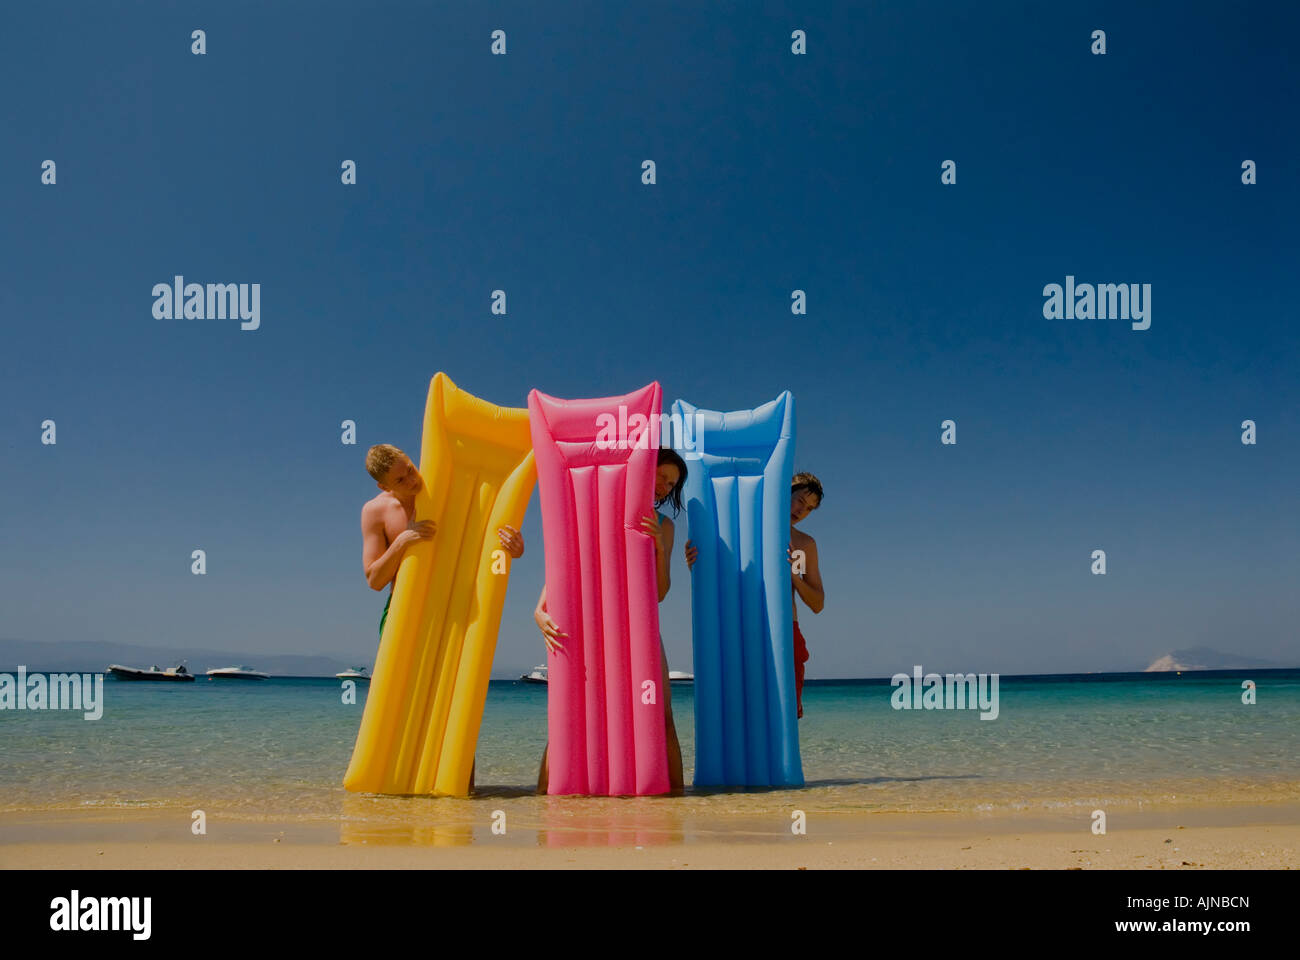 Three people looking out from behind colourful lilos inflatable airbeds sandy beach blue sea and sky Mediterranean Greece Stock Photo